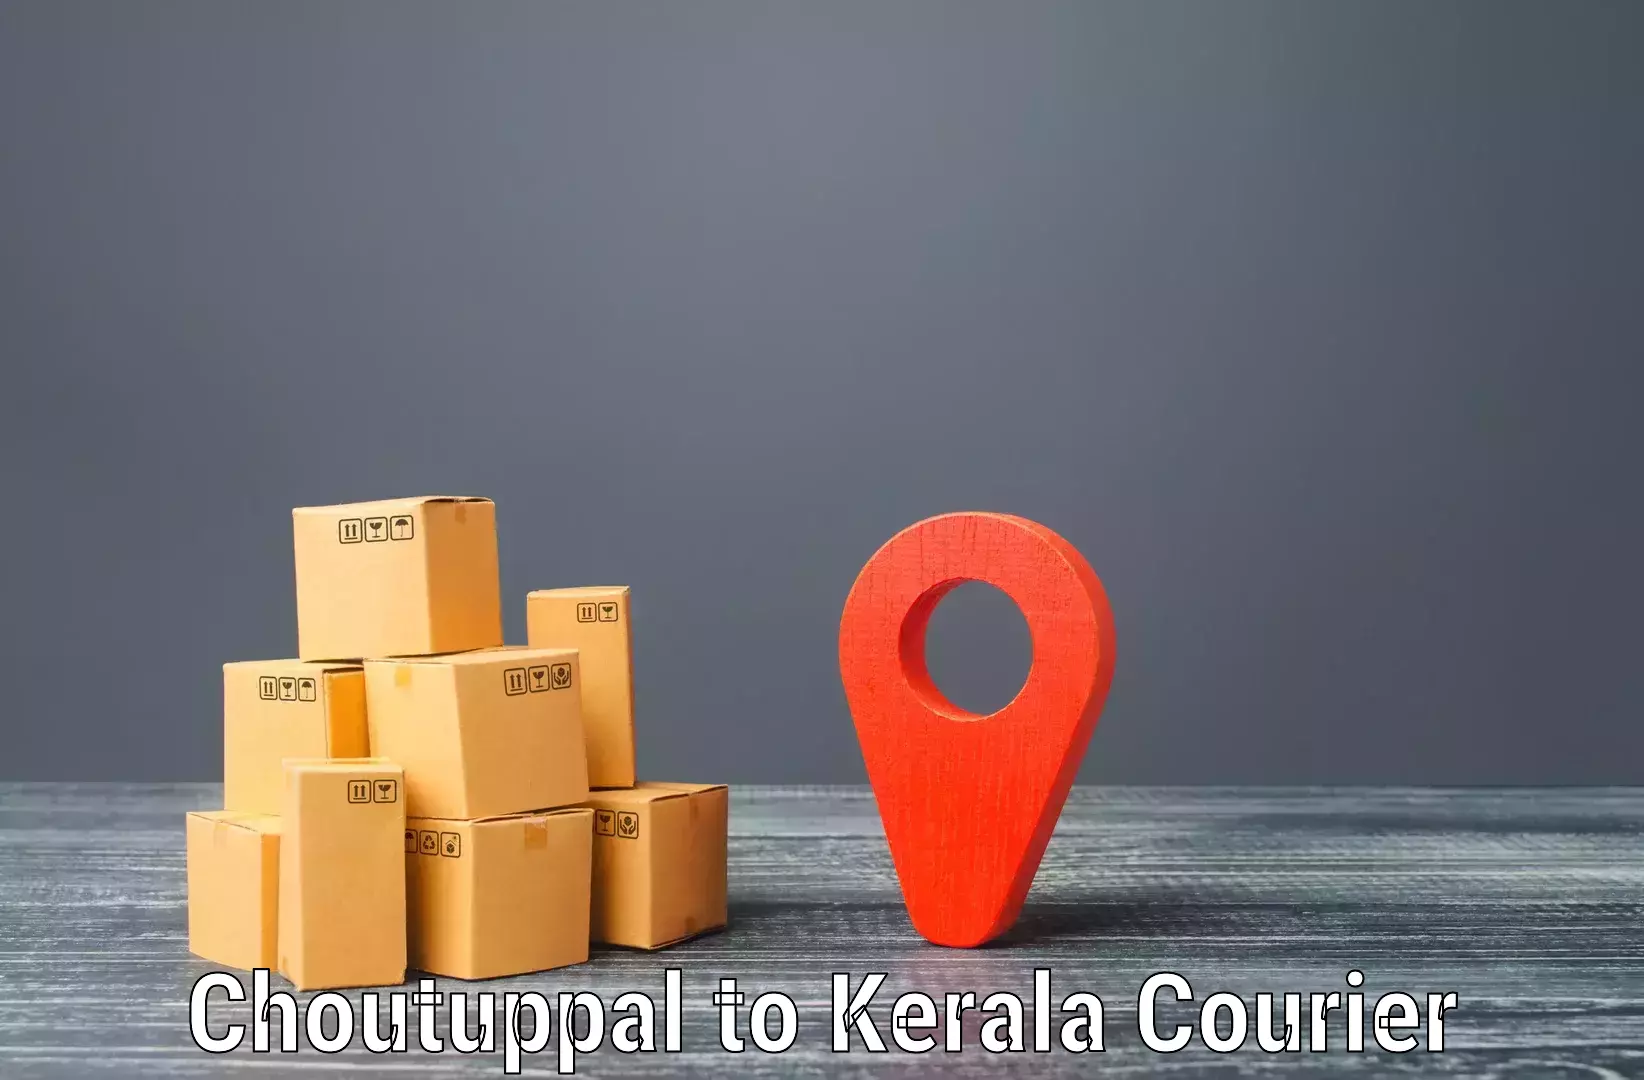 Automated shipping processes Choutuppal to Cochin University of Science and Technology